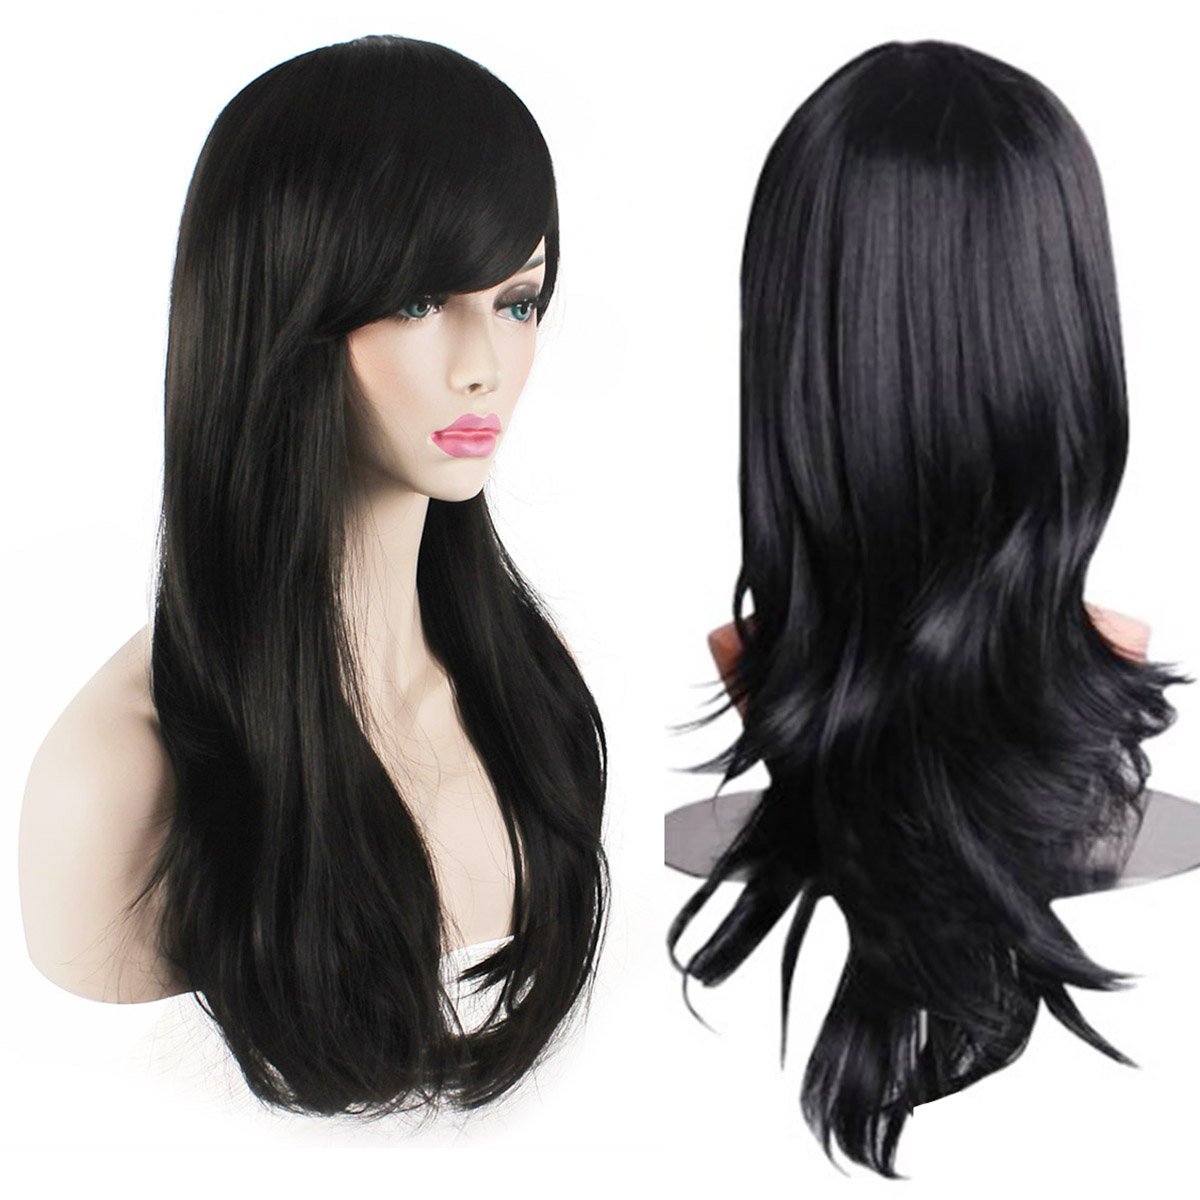 Price:$12.85    AKStore Women’s Heat Resistant 28-Inch 70cm Long Curly Hair Wig with Wig Cap, Black  Beauty